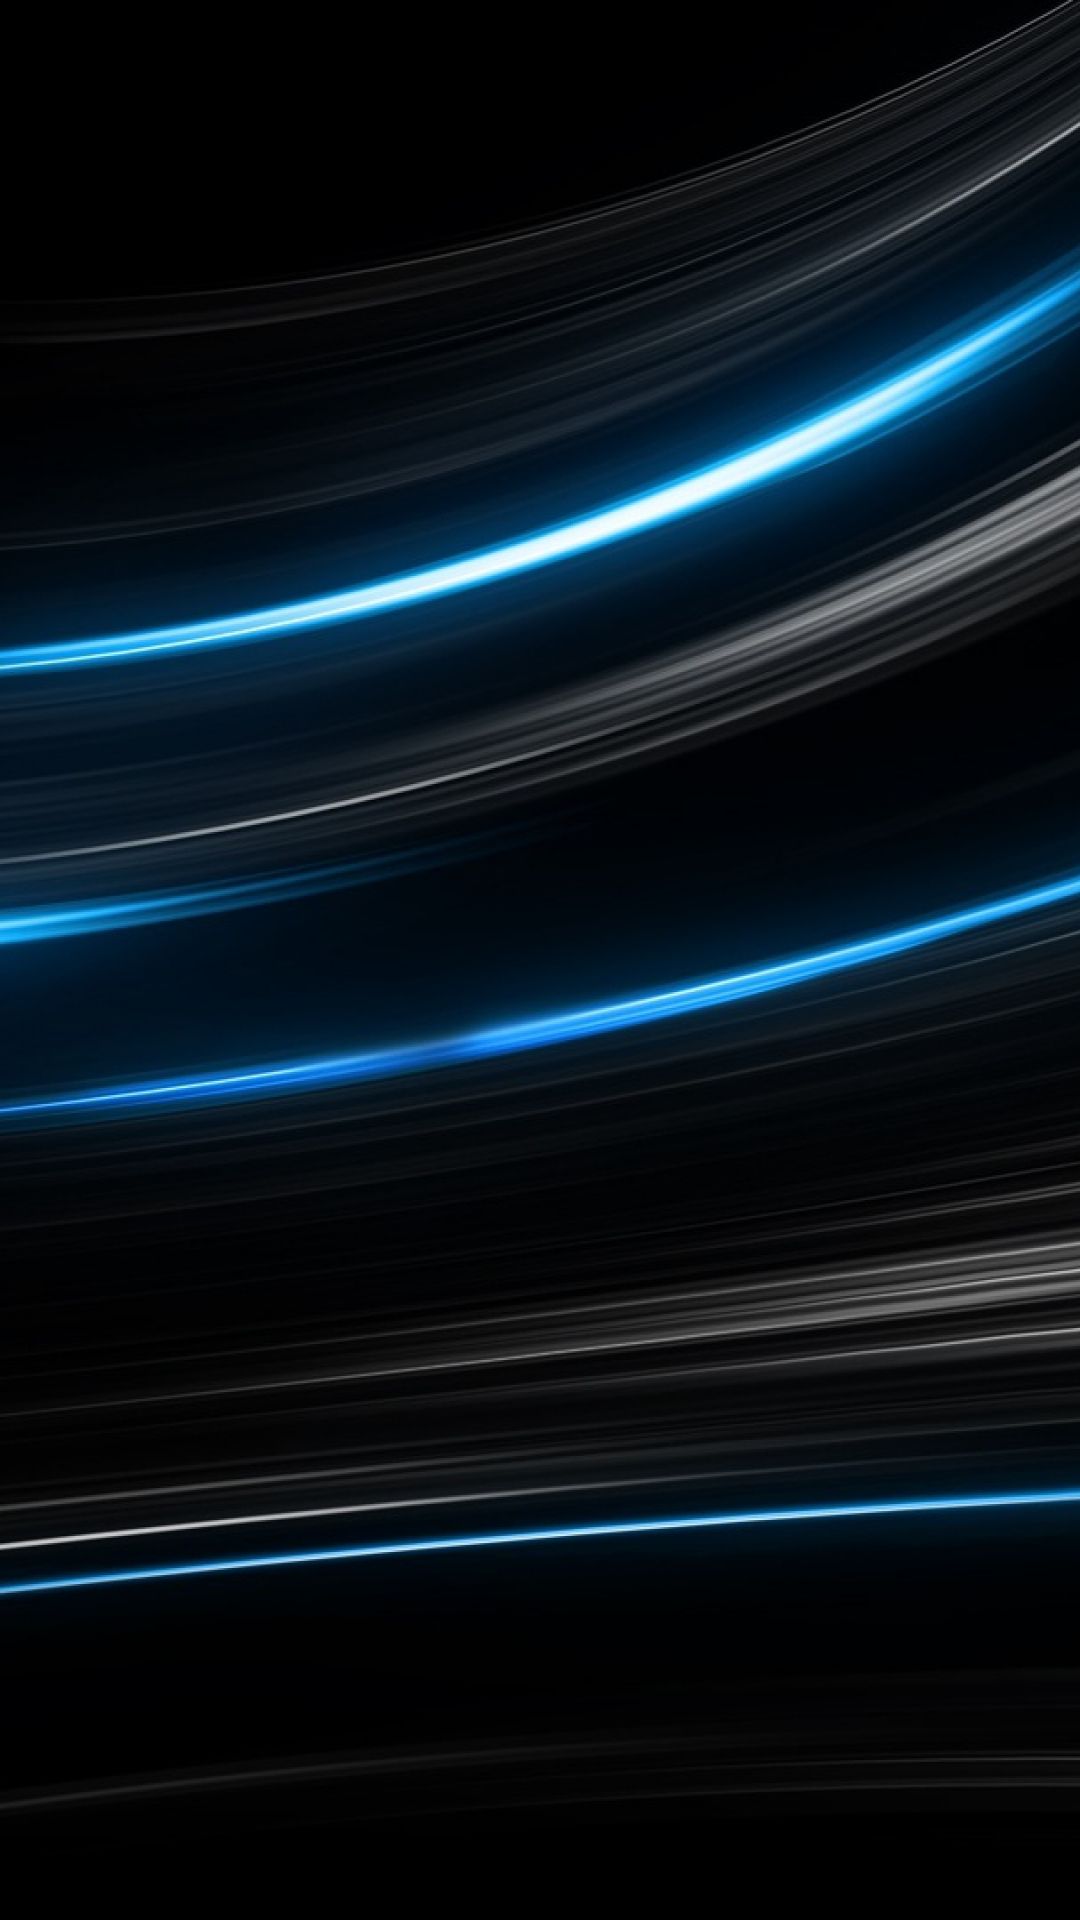 Free download HD Background Black Blue Abstract Lines Light